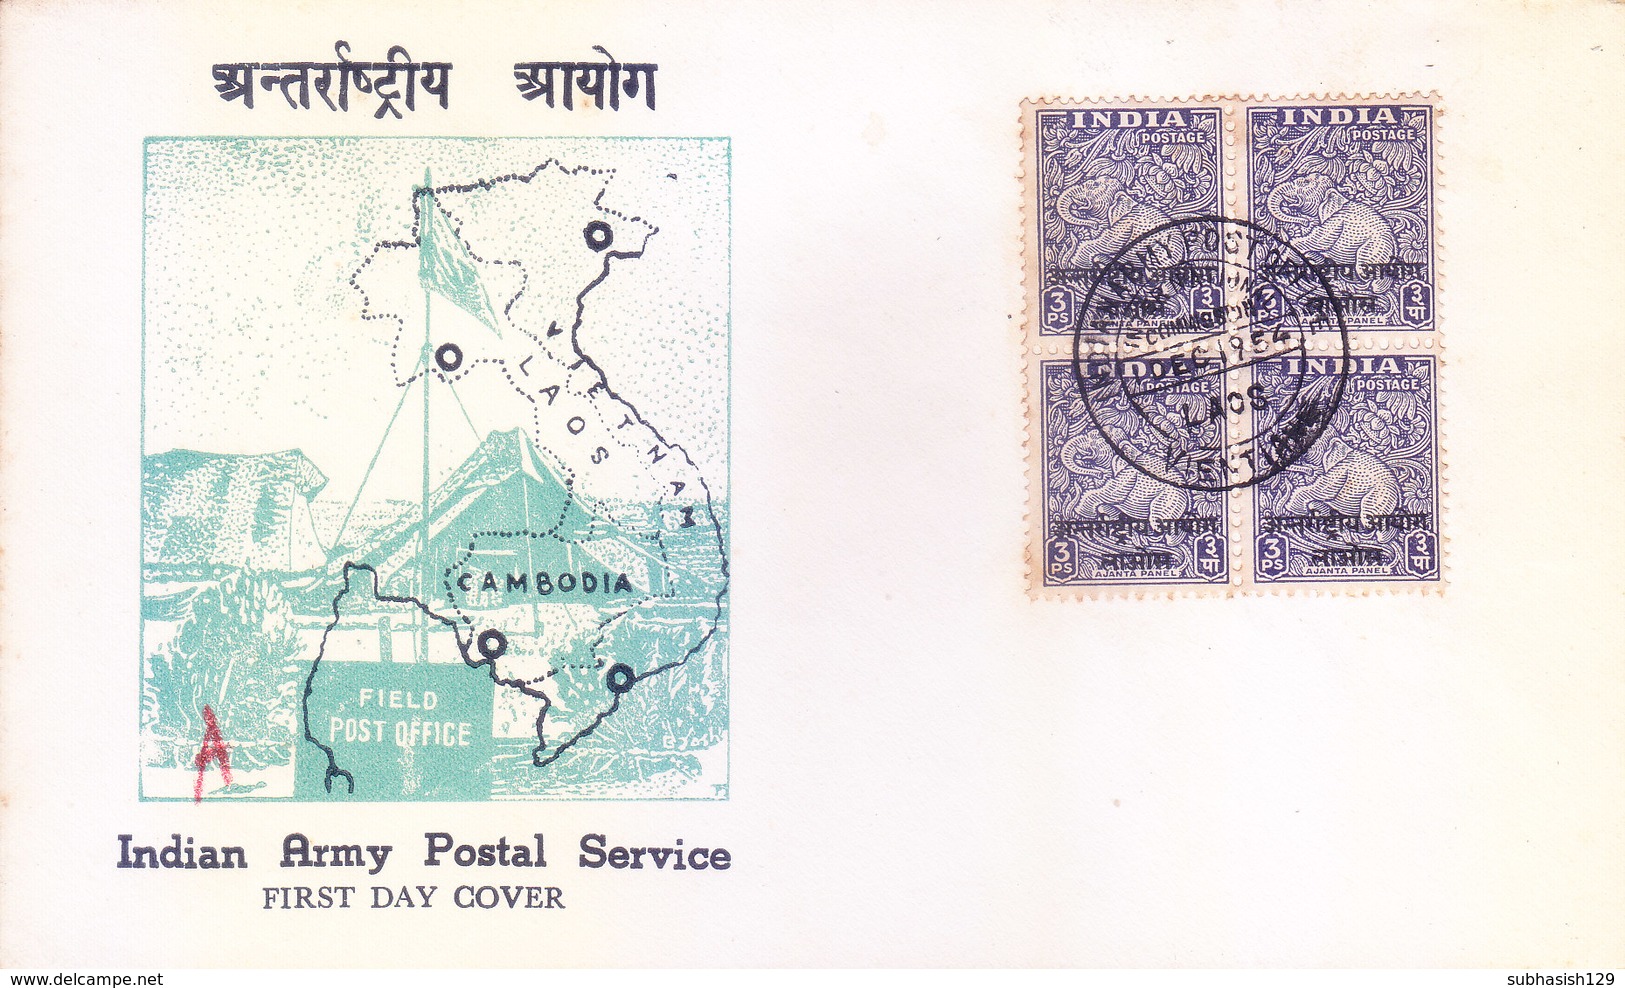 INDIA 1954 FIRST DAY COVER - INTERNATIONAL CONTROL COMMISSION - LAOS, VIETNAM - Franquicia Militar